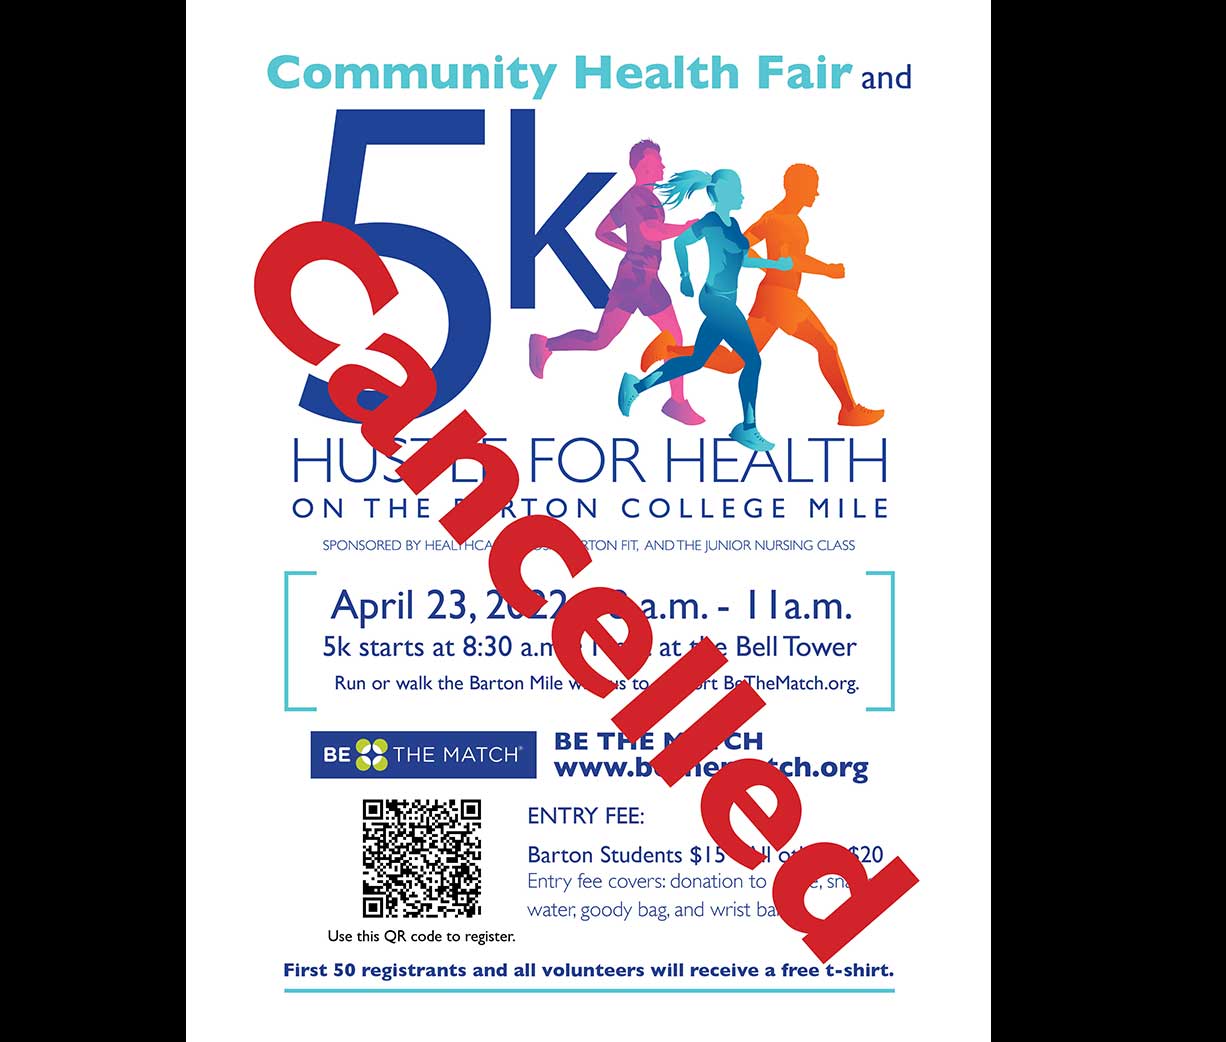 Featured image for post: Hustle for Health 5K on Saturday, April 23 CANCELLED